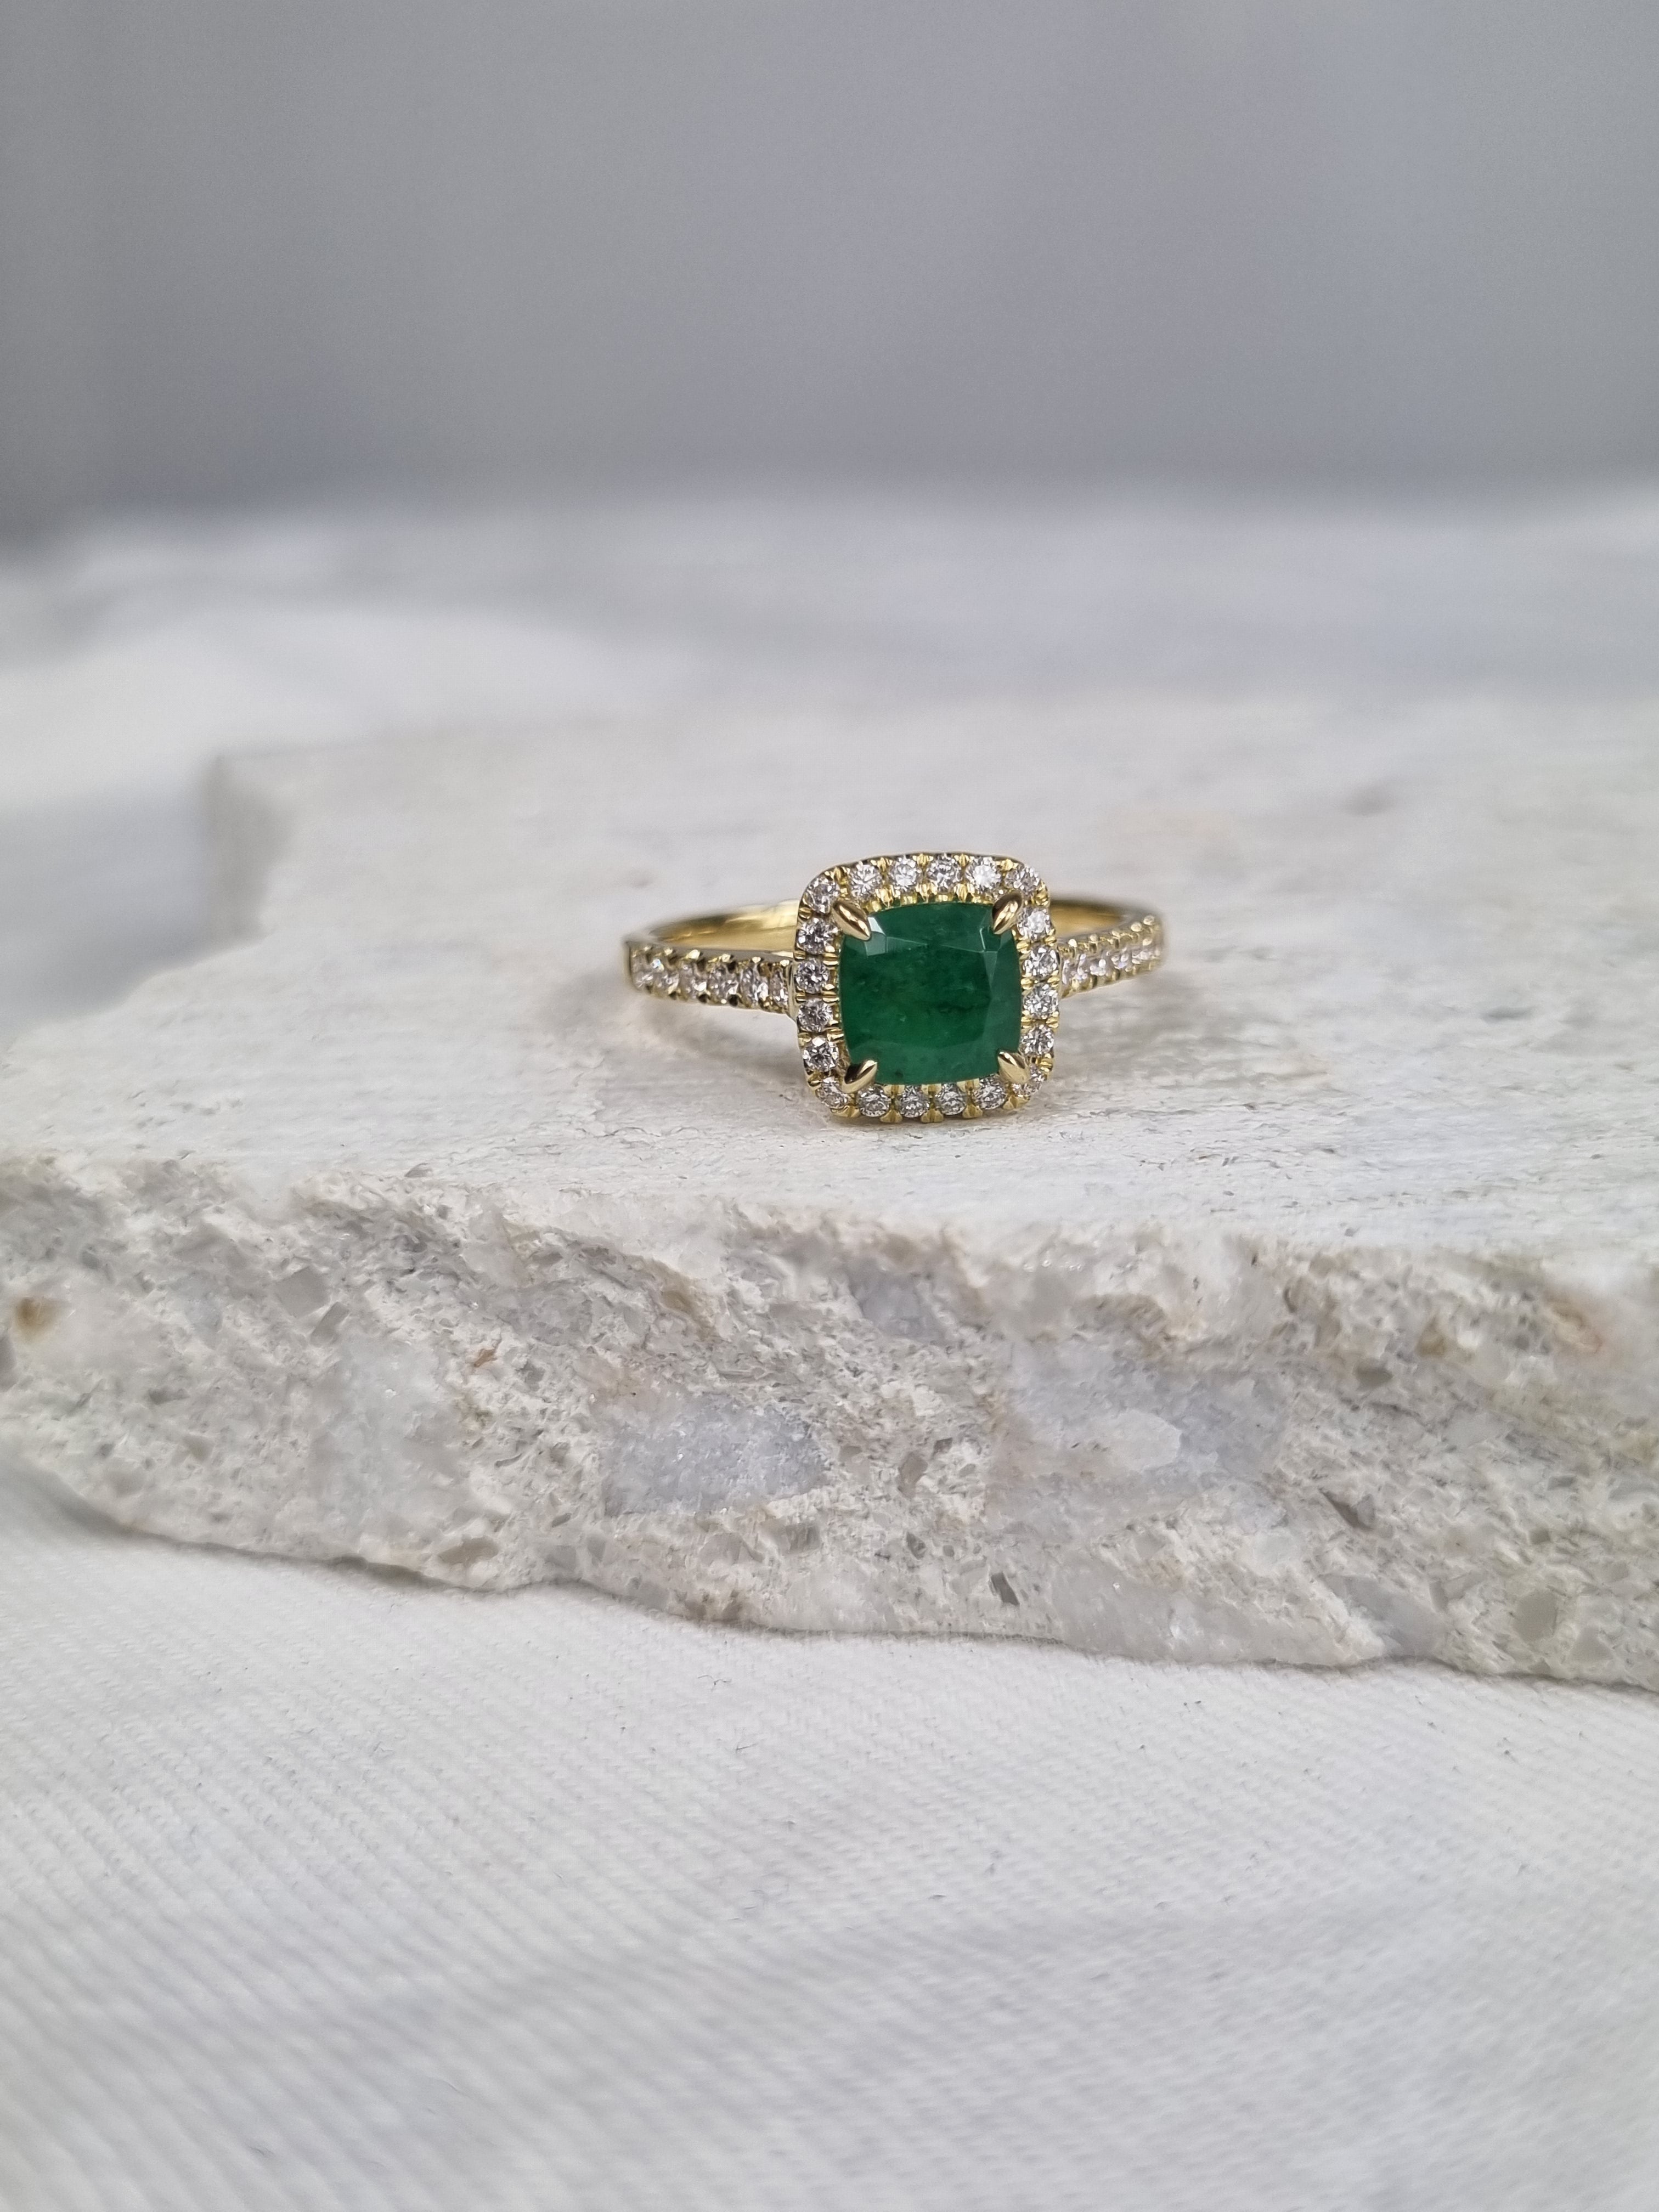 18ct Yellow Gold Emerald and Diamond ring